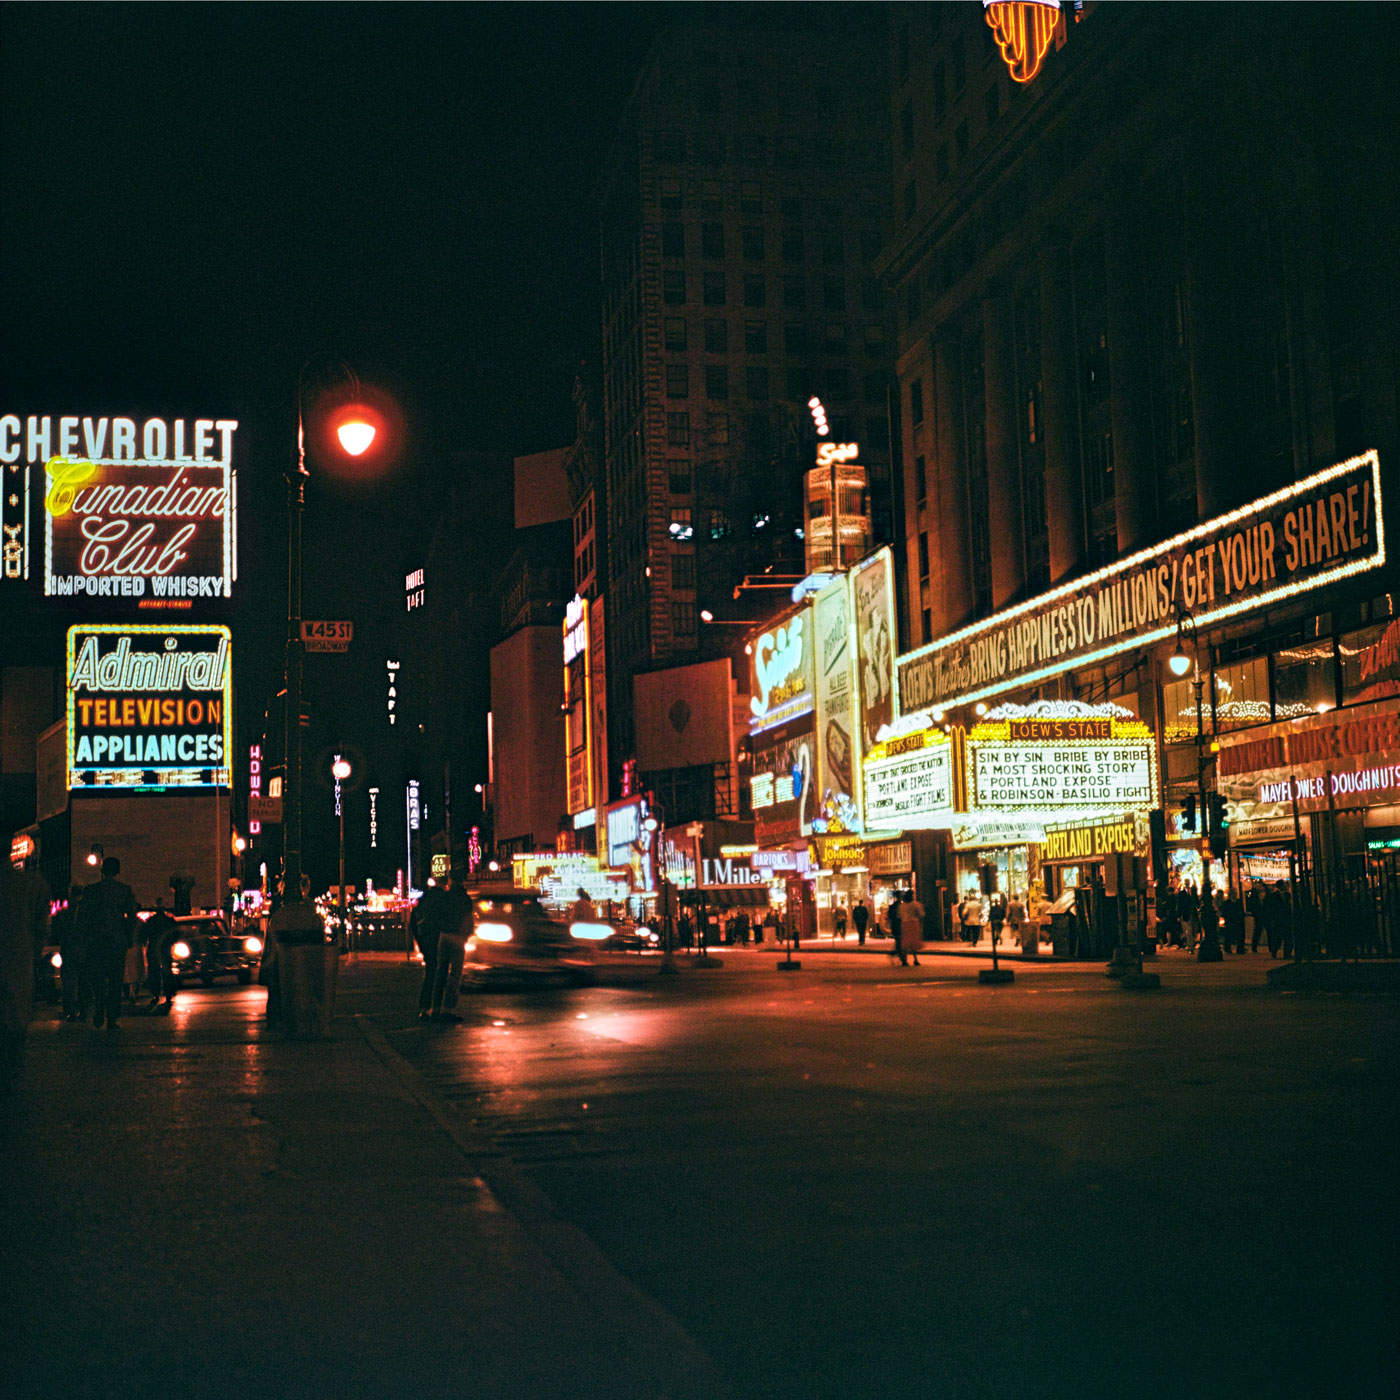 With his eyes wide open 02: Max Näder “Times Square, New York” (1957)